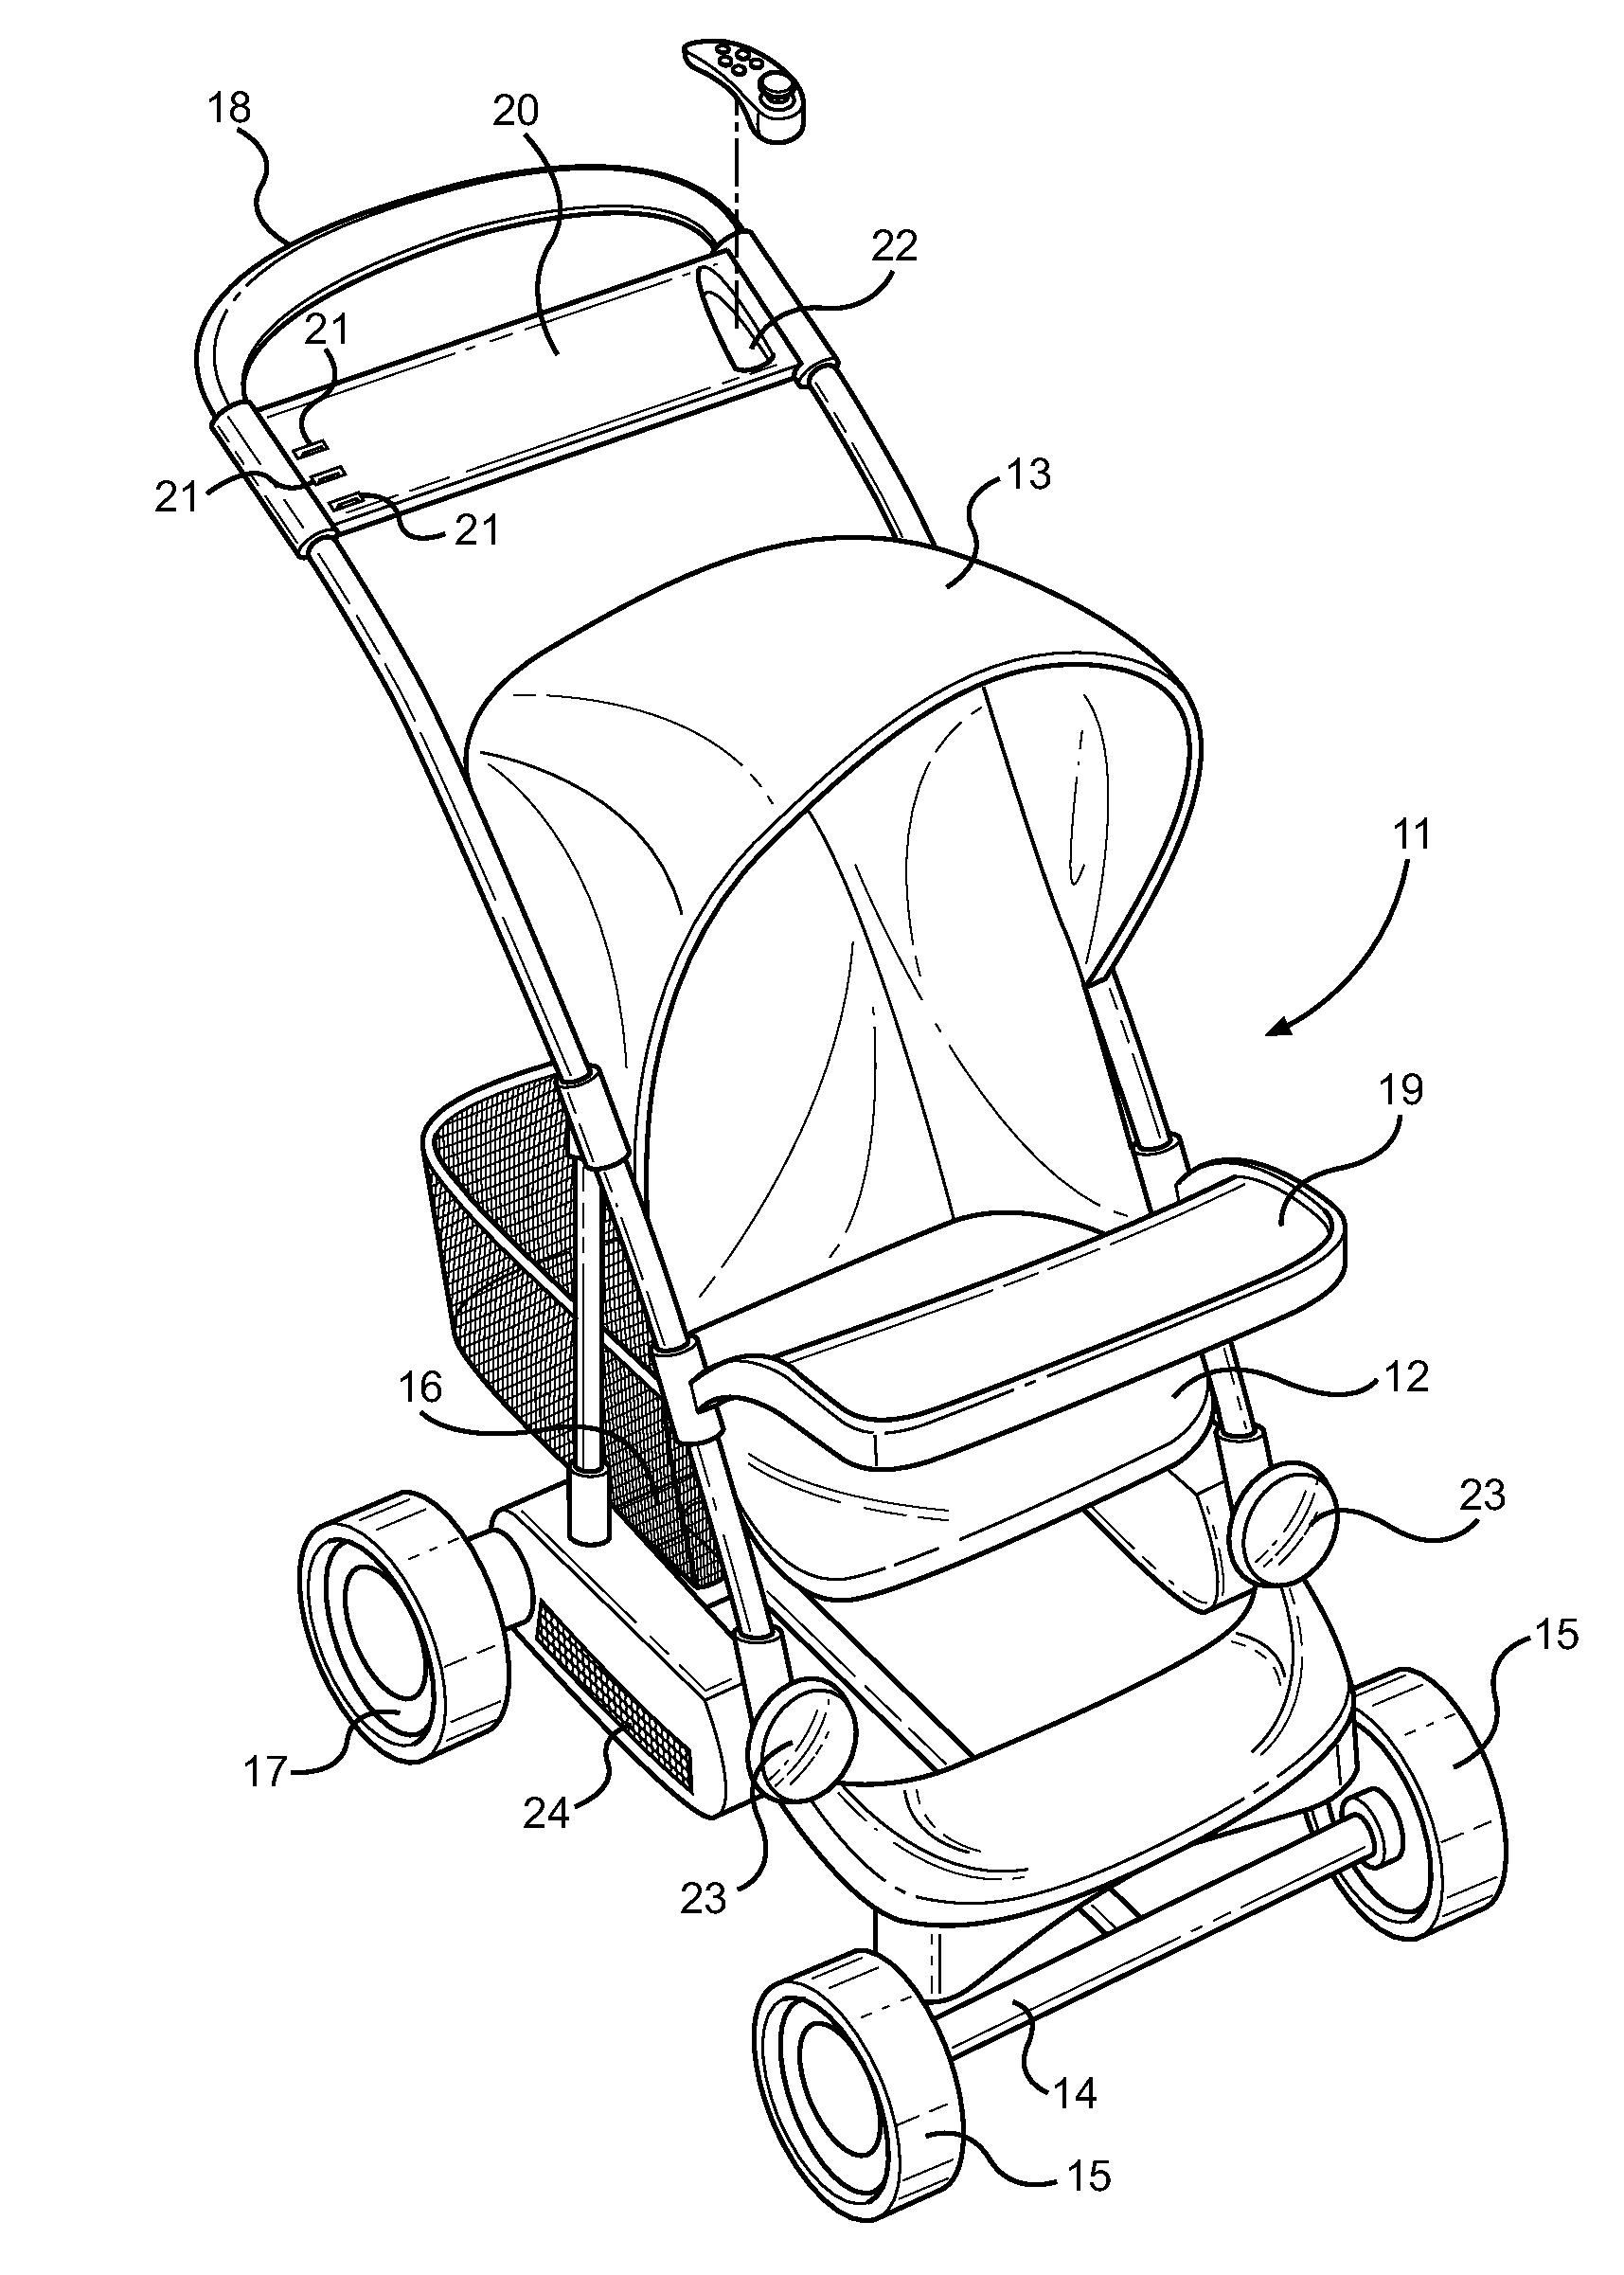 Remote Controllable Self-Propelled Stroller